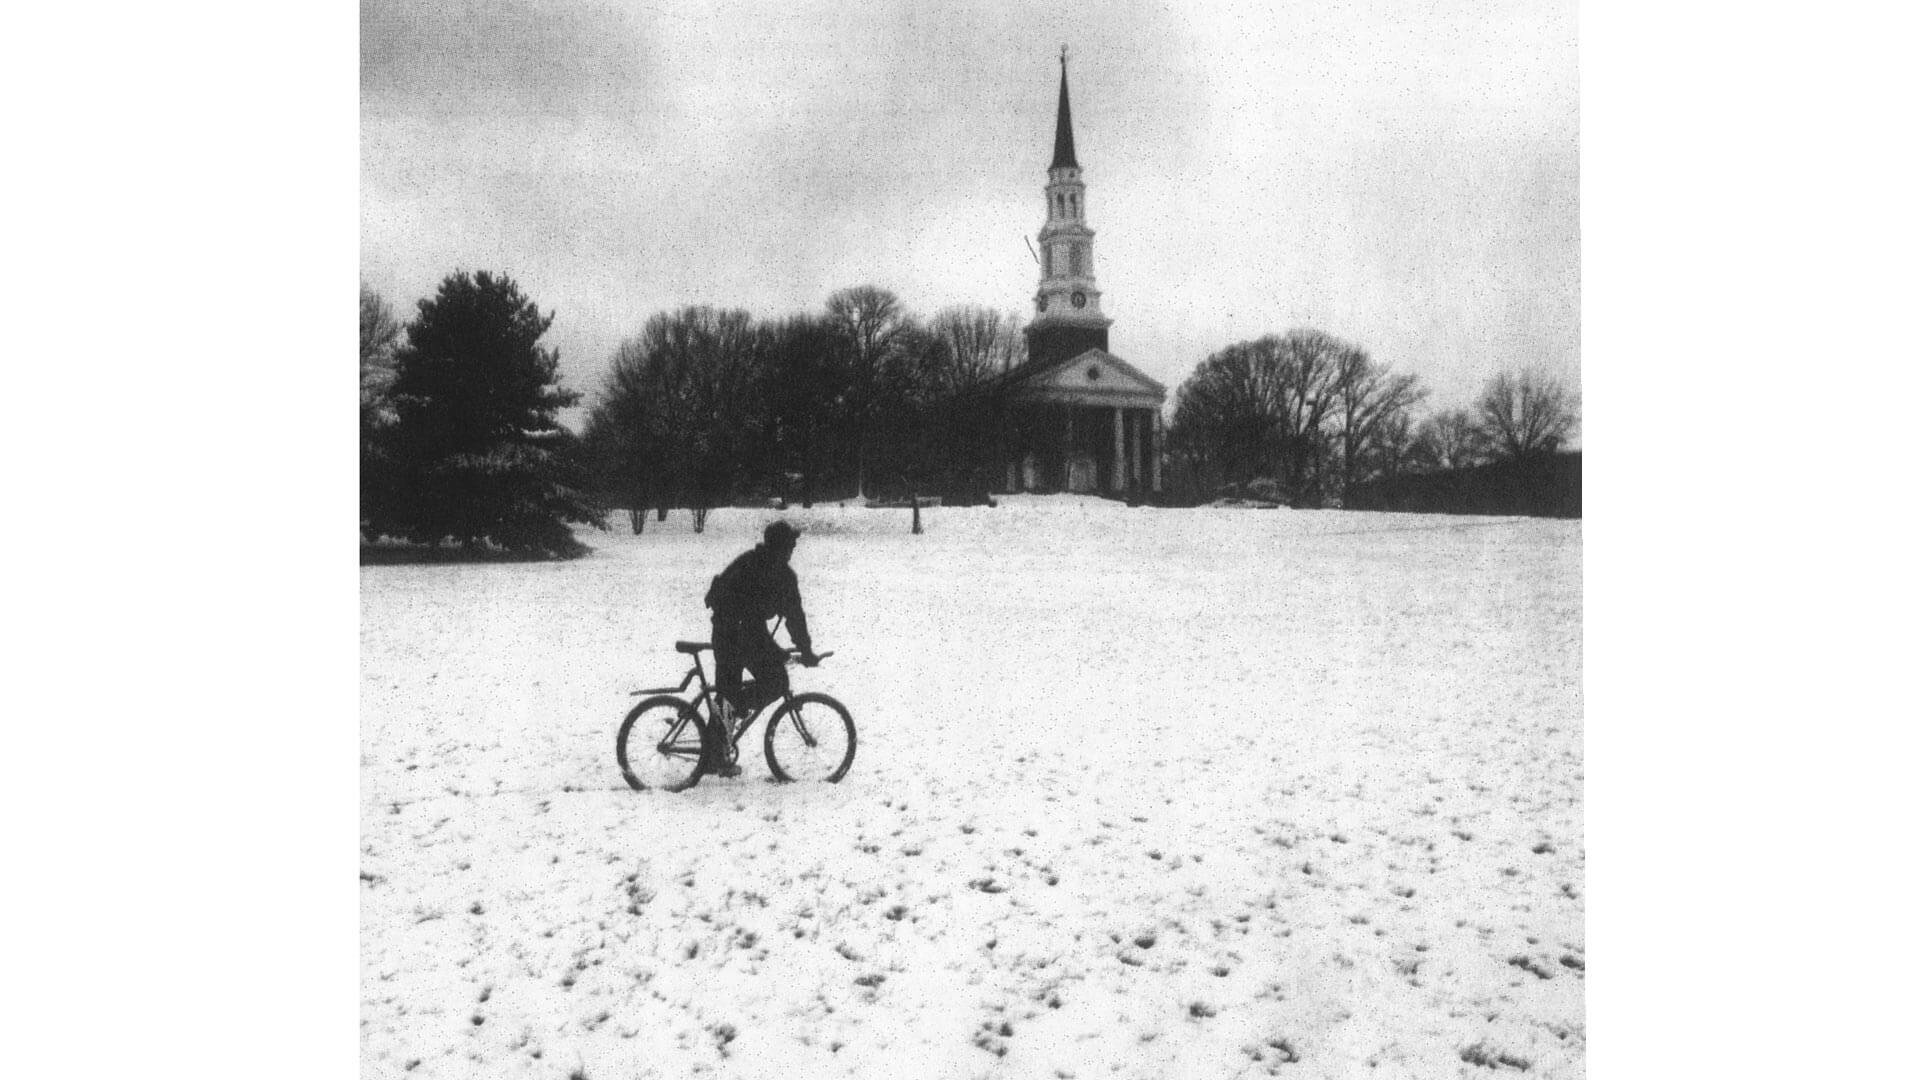 Student rides bike in the snow at UMD in 2005